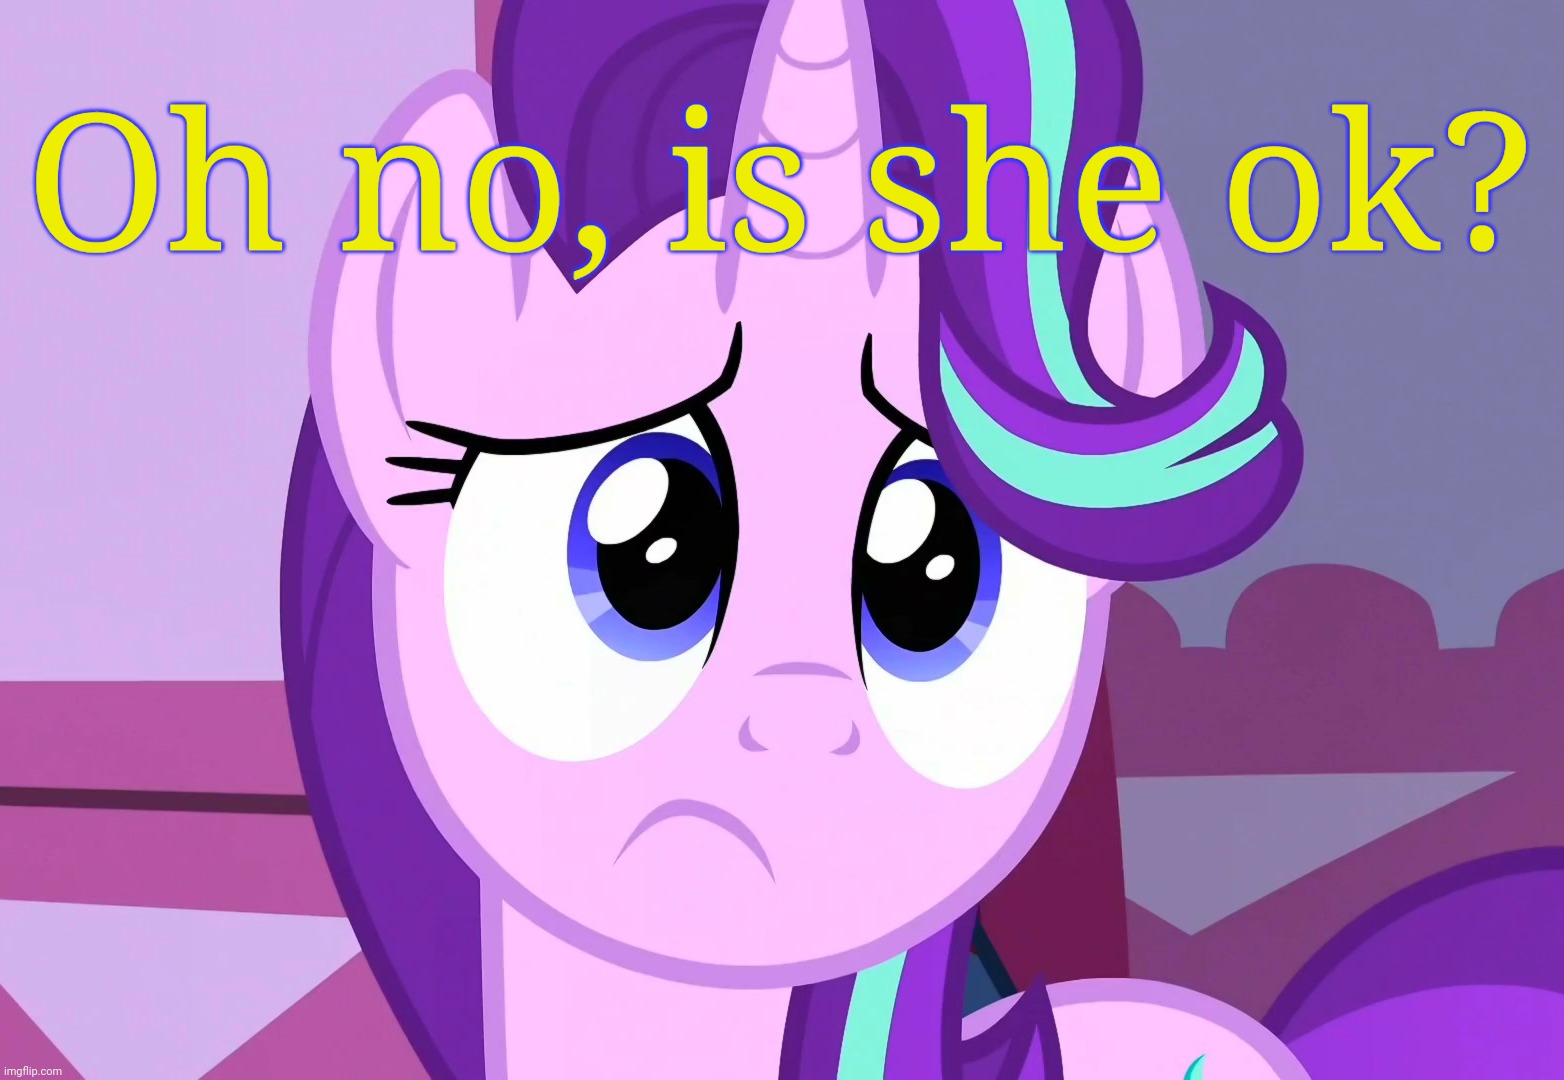 Sadlight Glimmer (MLP) | Oh no, is she ok? | image tagged in sadlight glimmer mlp | made w/ Imgflip meme maker